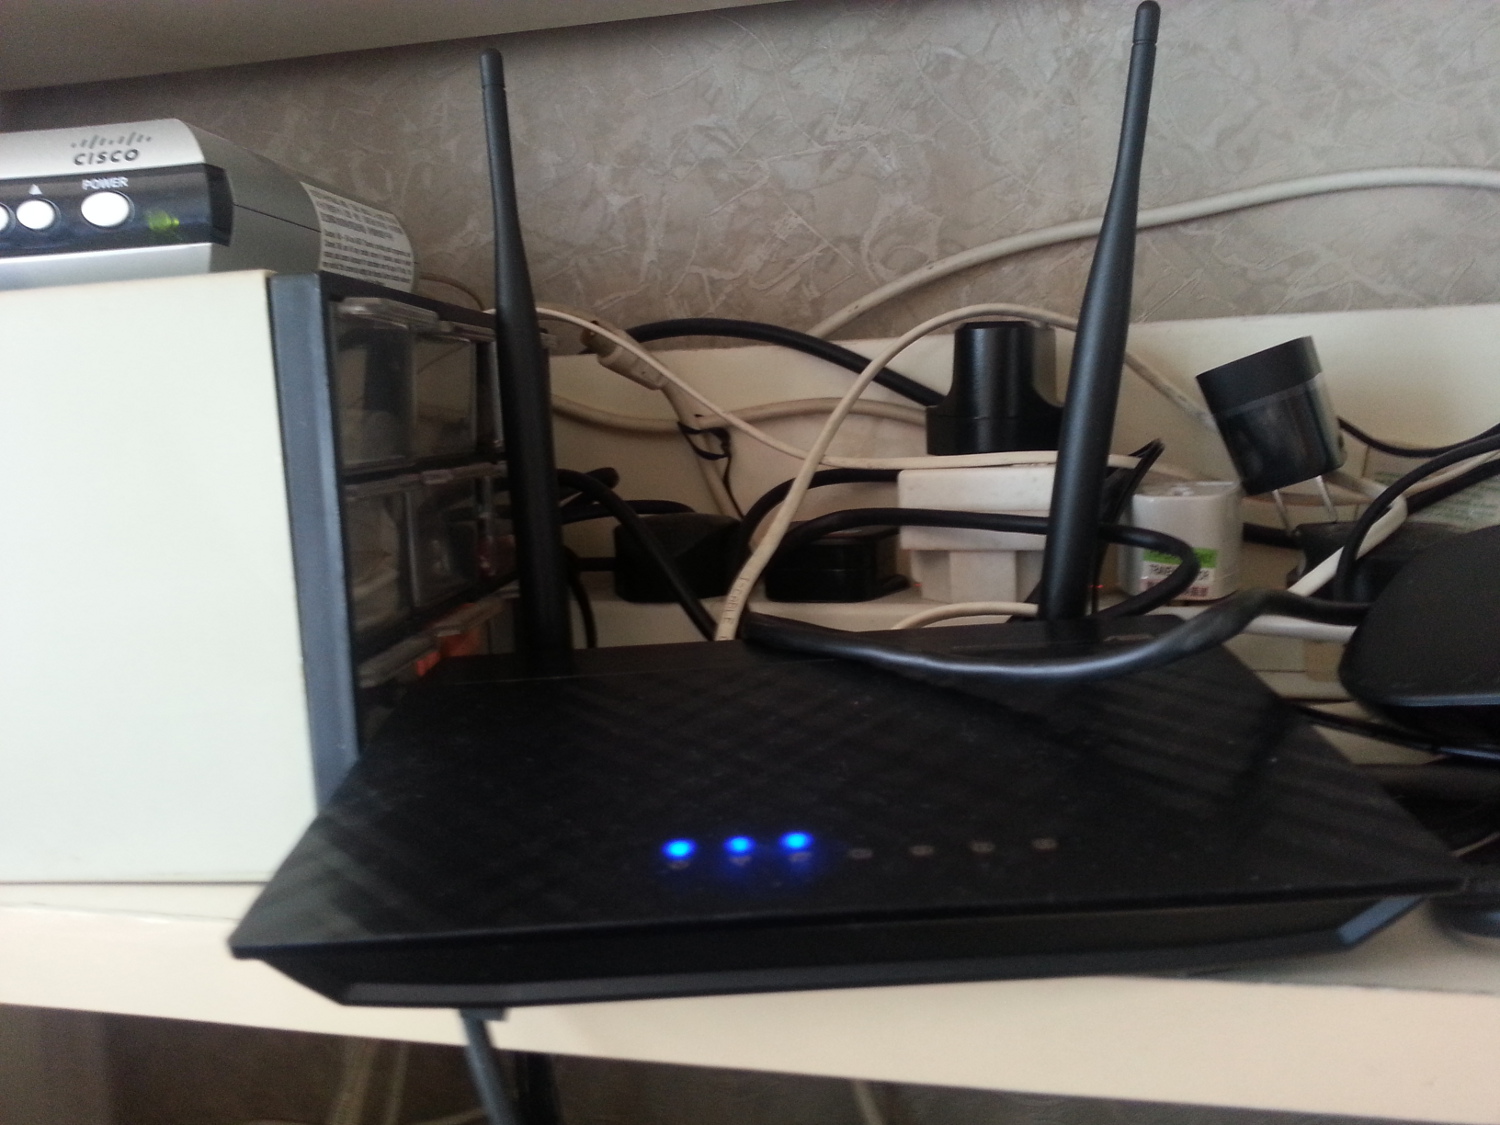 ivpn on router